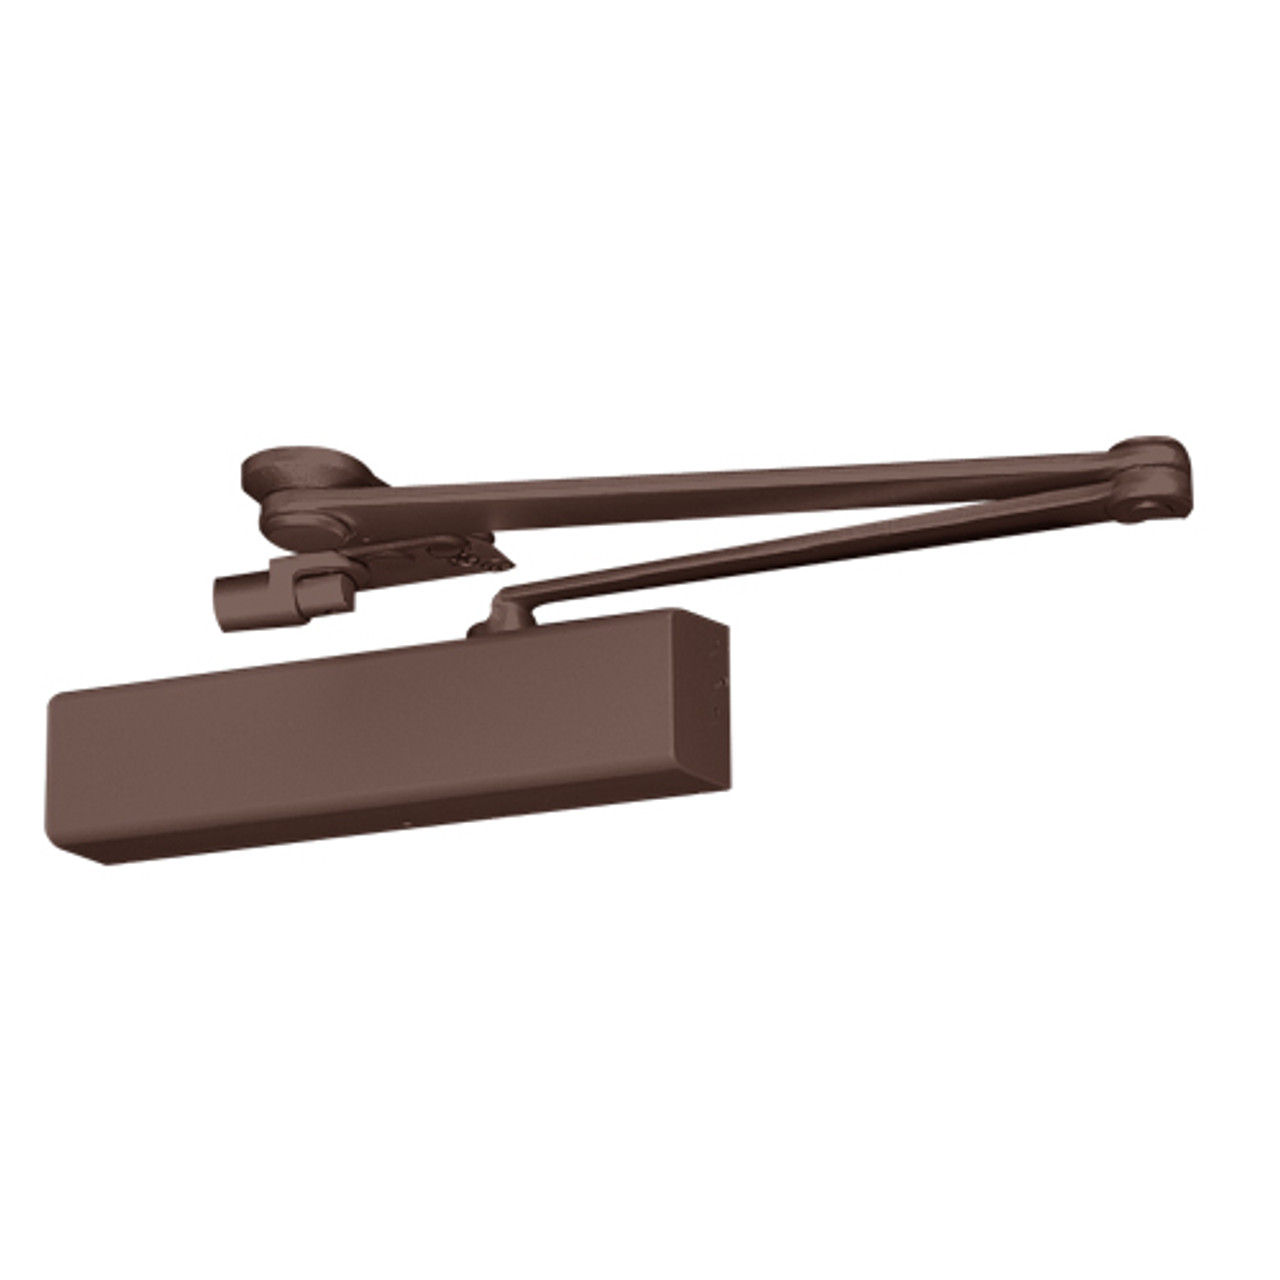 CPS8501A-690 Norton 8000 Series Full Cover Non-Hold Open Door Closers with CloserPlus Spring Arm in Statuary Bronze Finish